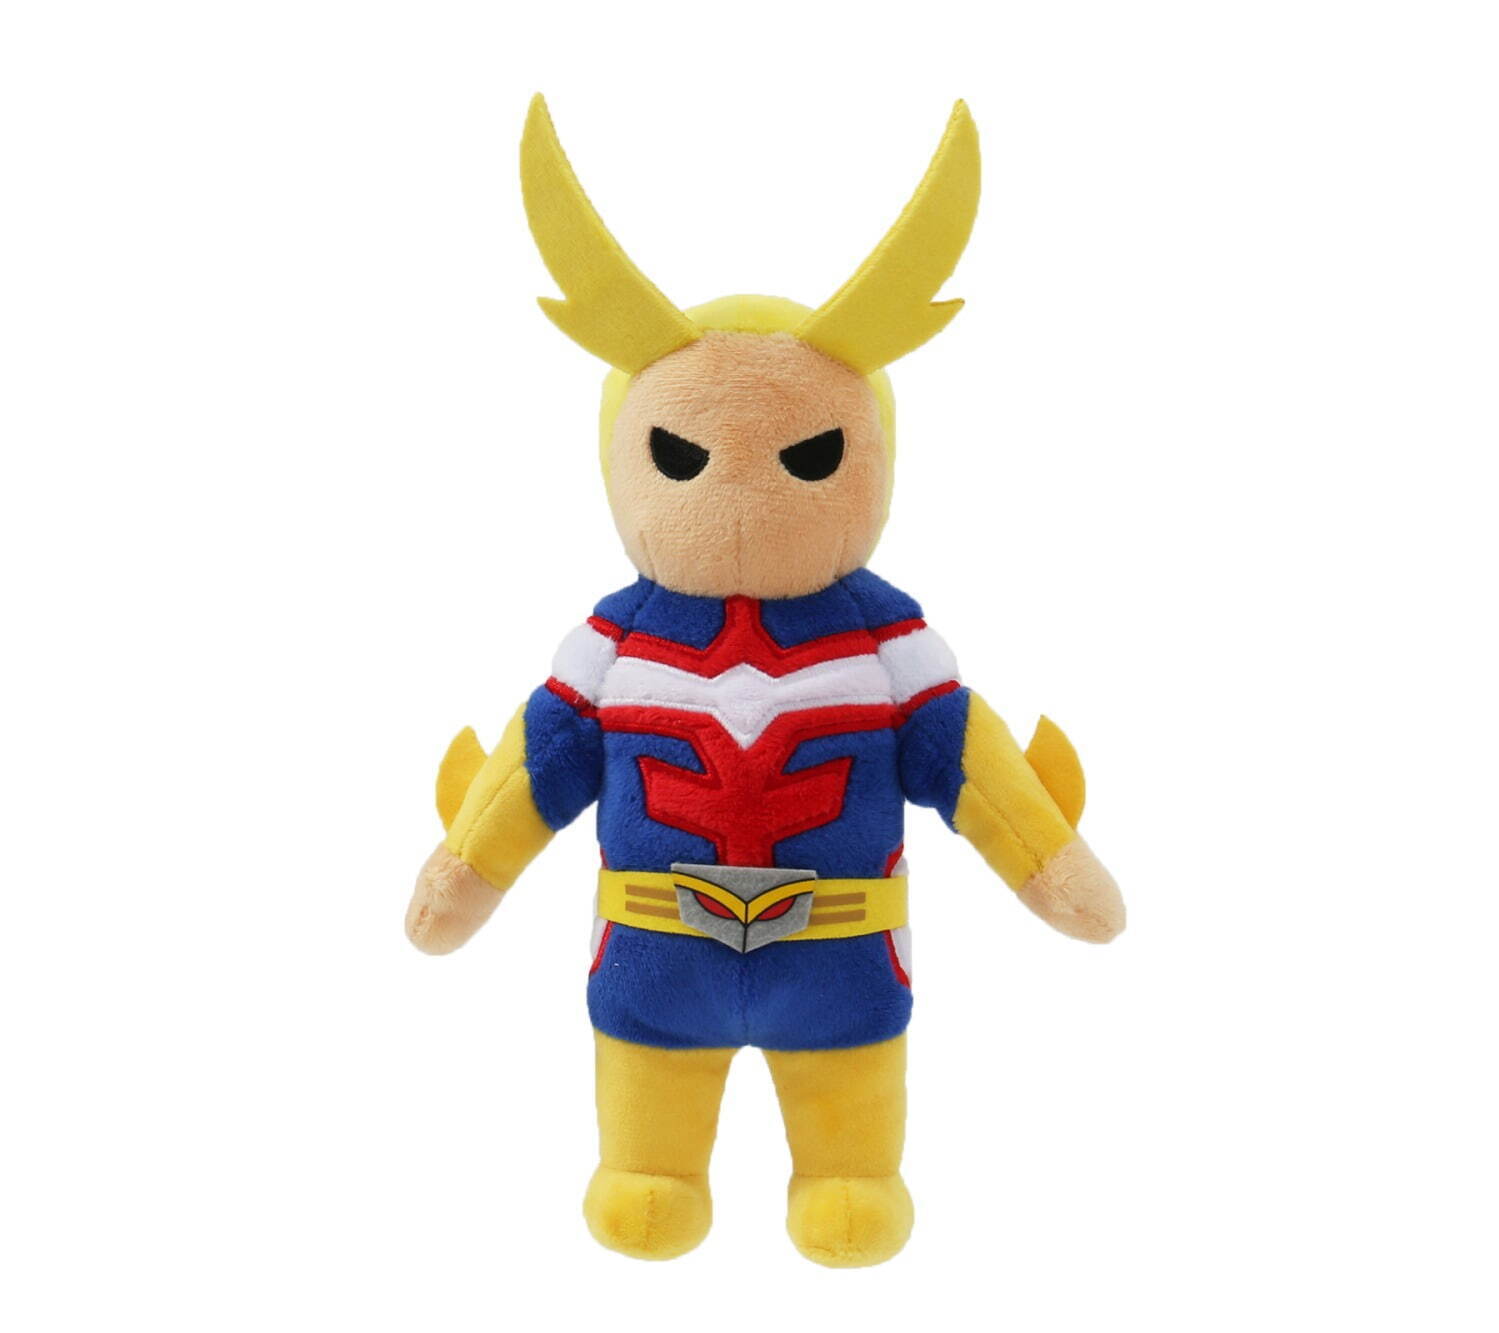 TOP HERO COLLECTION ［ALL MIGHT］〈大阪新登場〉
3,000円 ※購入個数制限：各5個